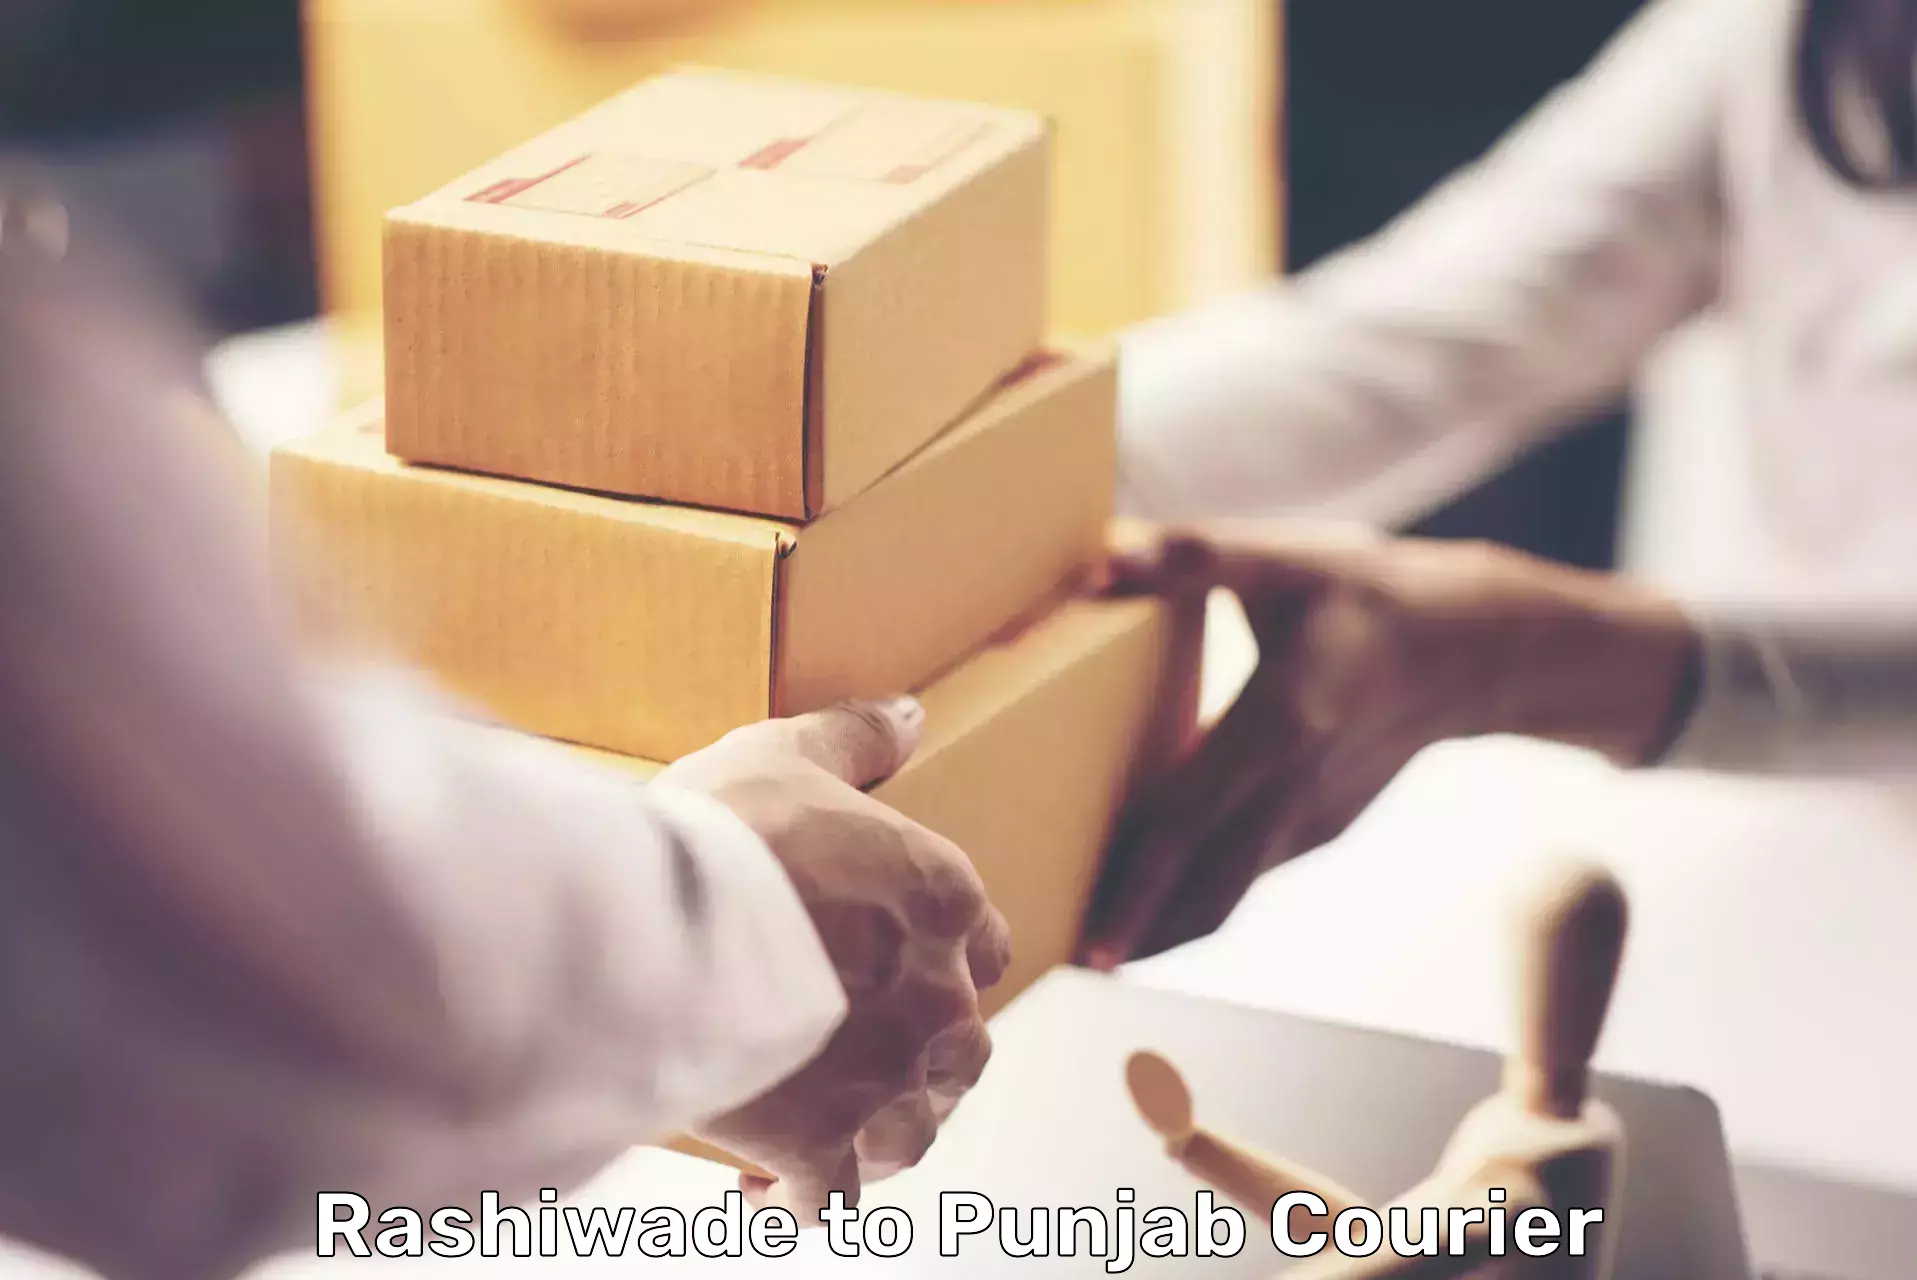 Expedited parcel delivery Rashiwade to Mohali